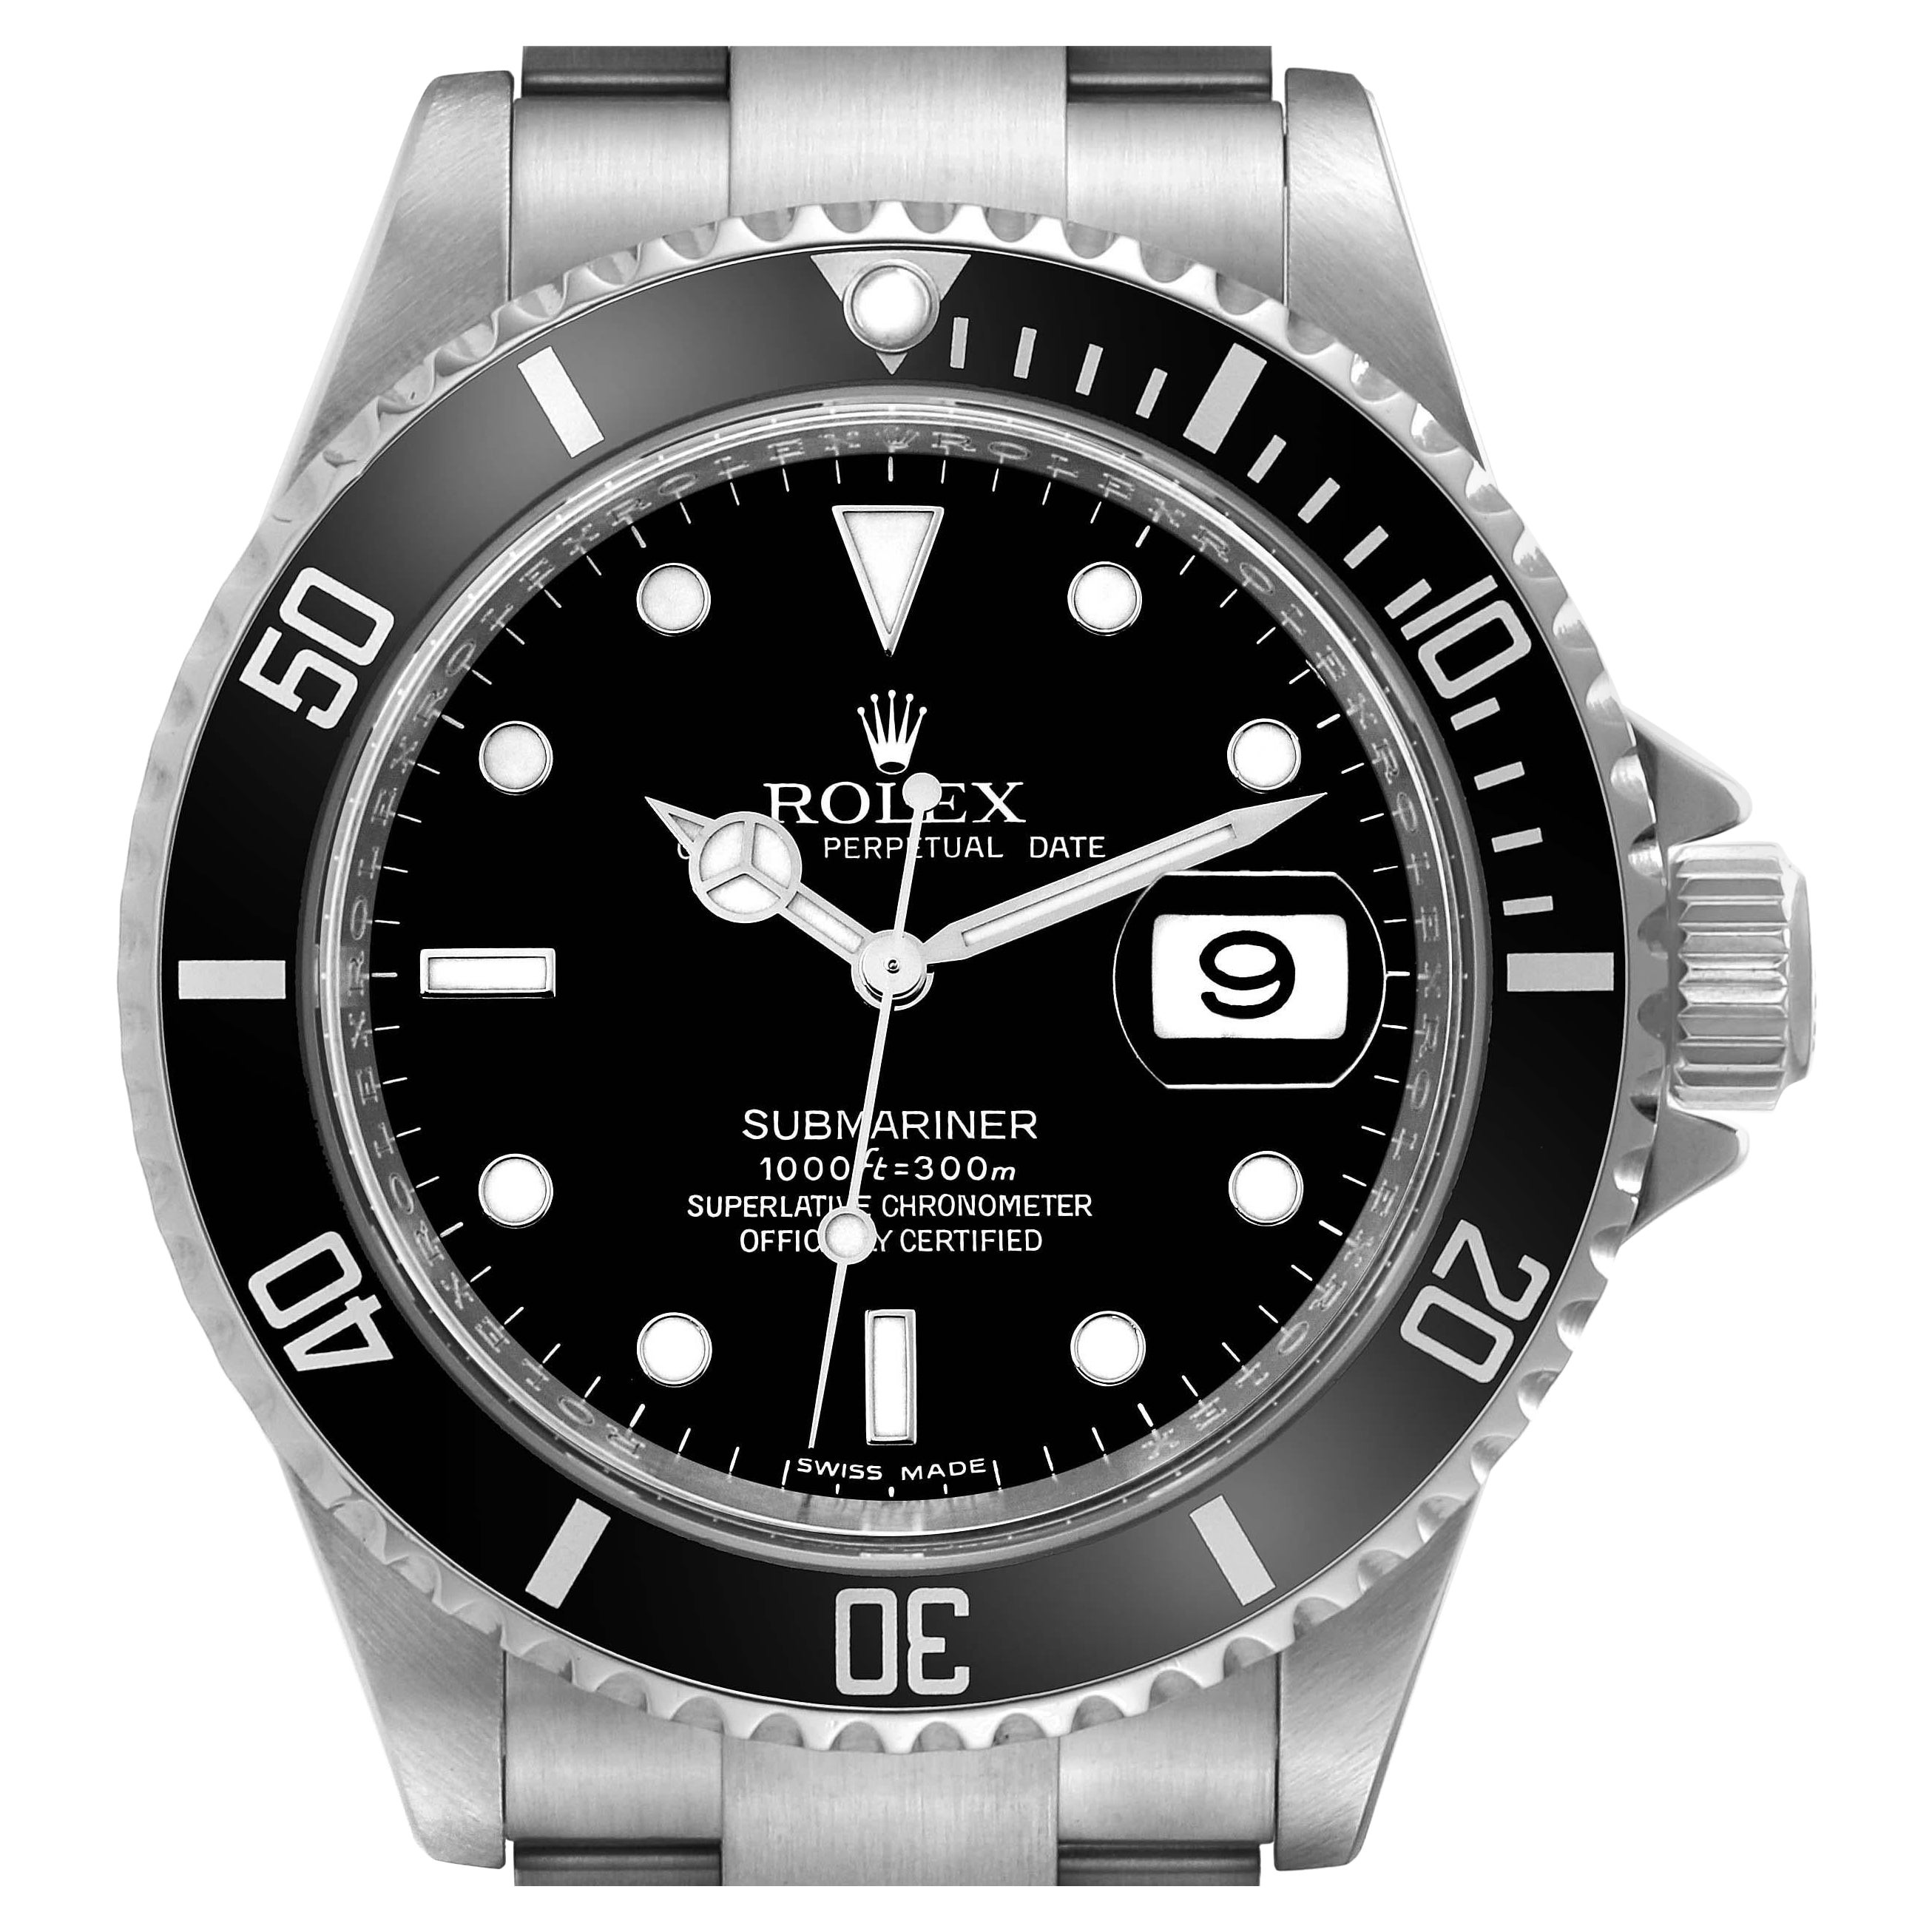 Rolex Submariner Date Black Dial Steel Mens Watch 16610 Box Card For Sale